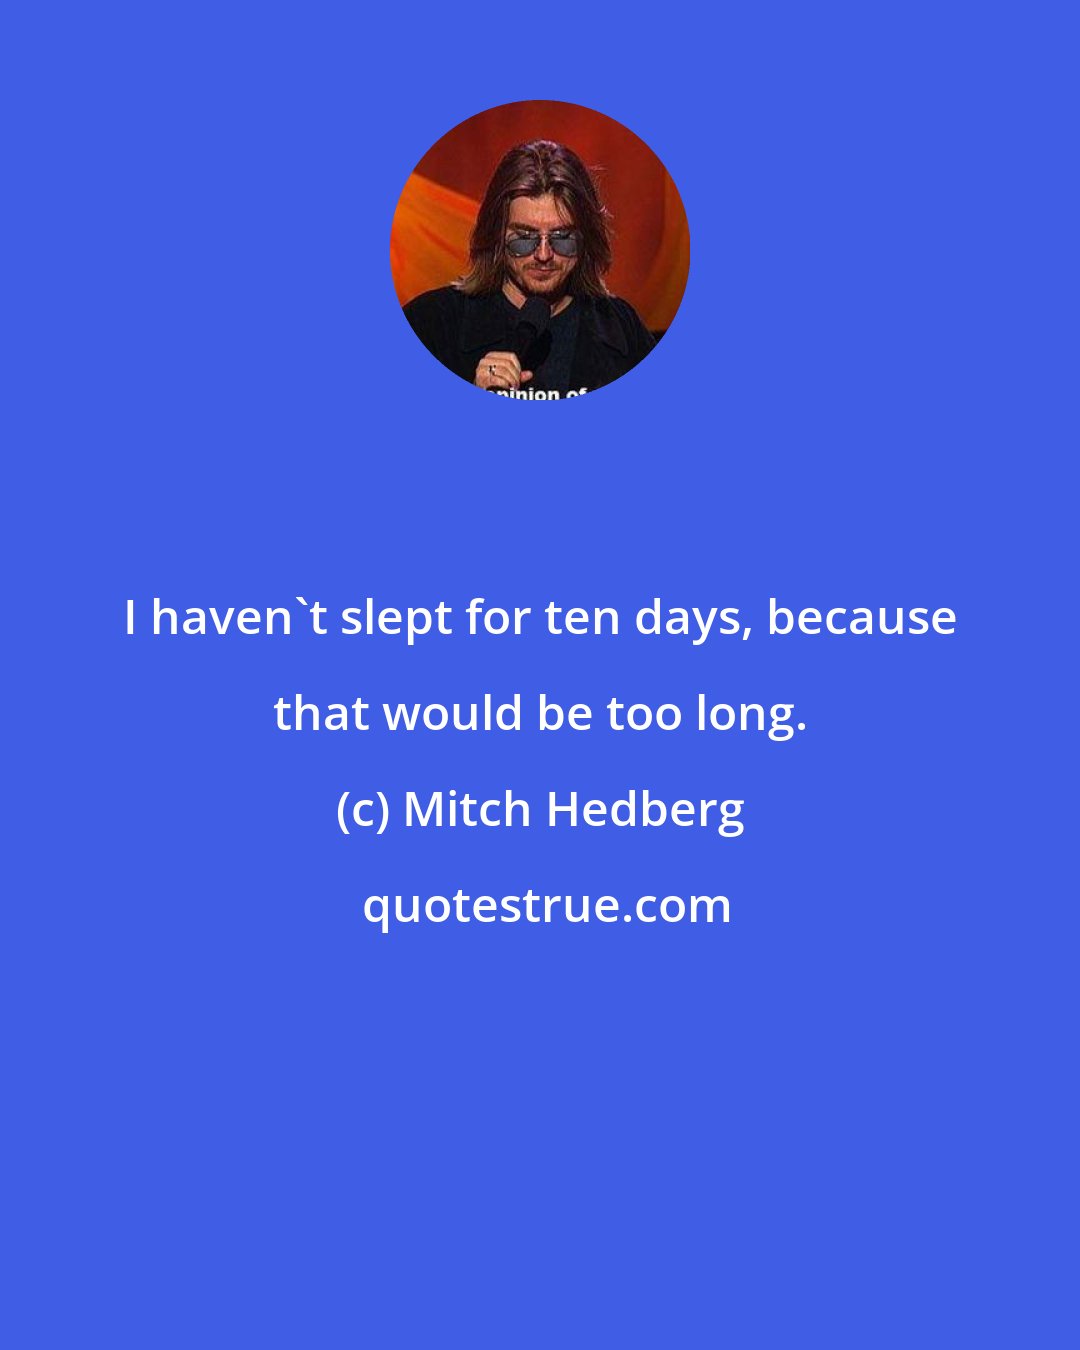 Mitch Hedberg: I haven't slept for ten days, because that would be too long.